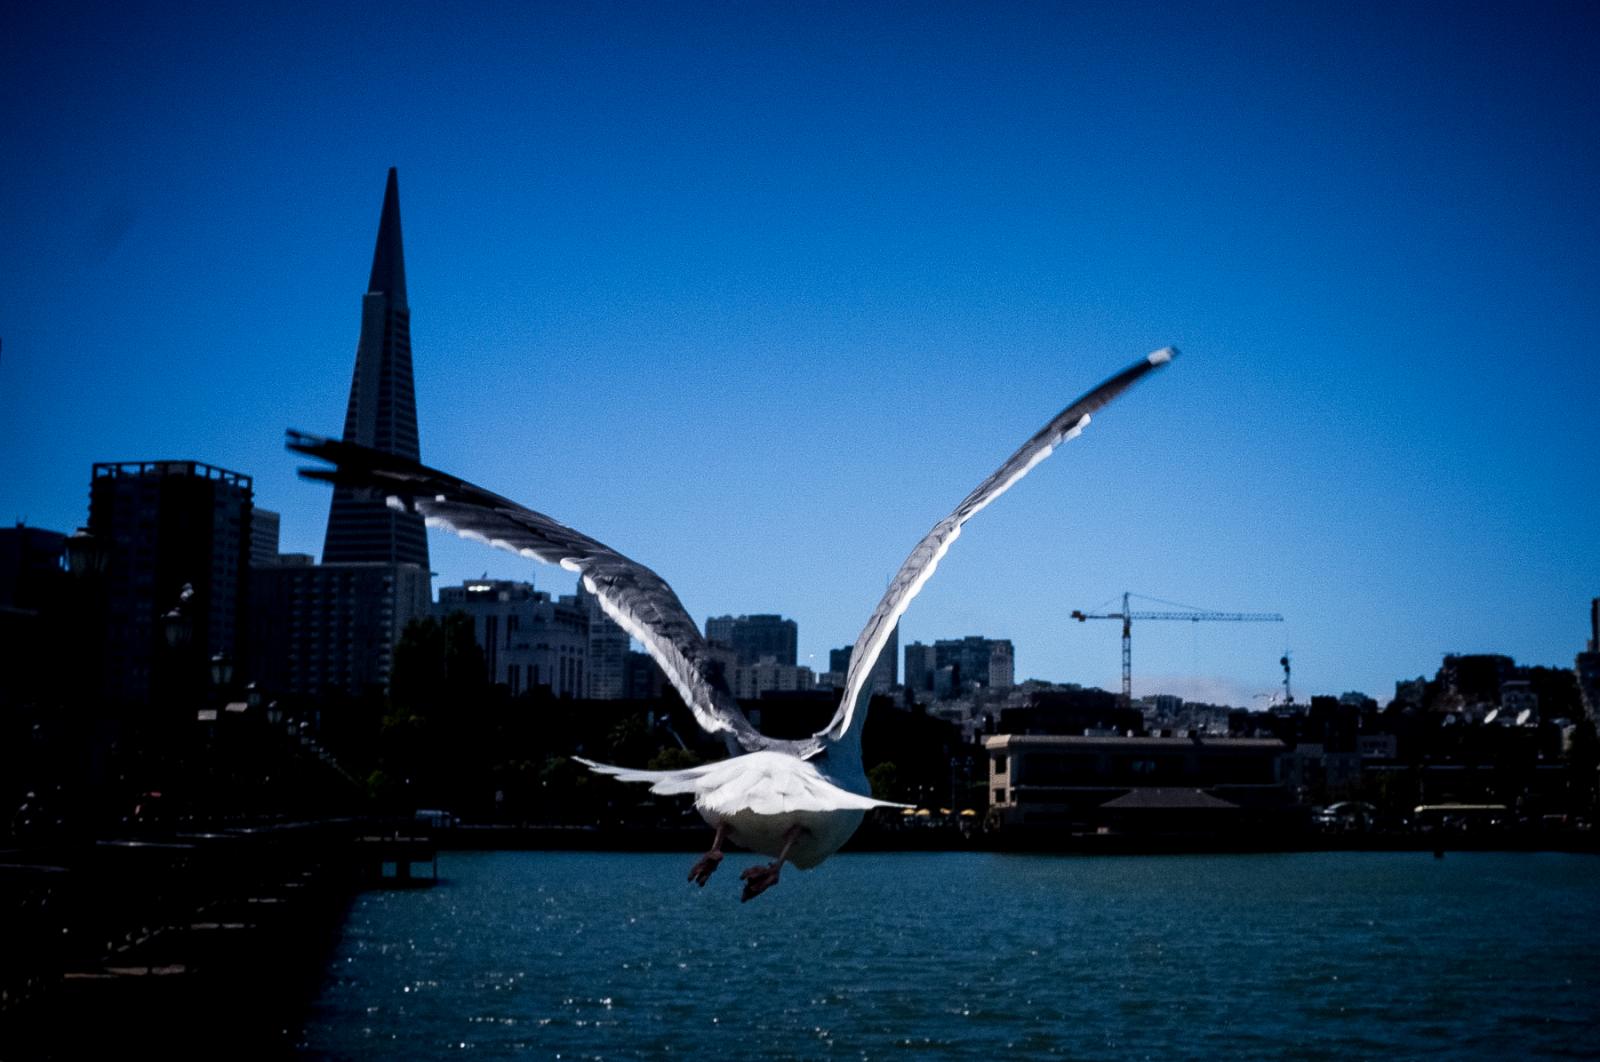 Image from Aesthetic - Embarcadero, San Francisco.